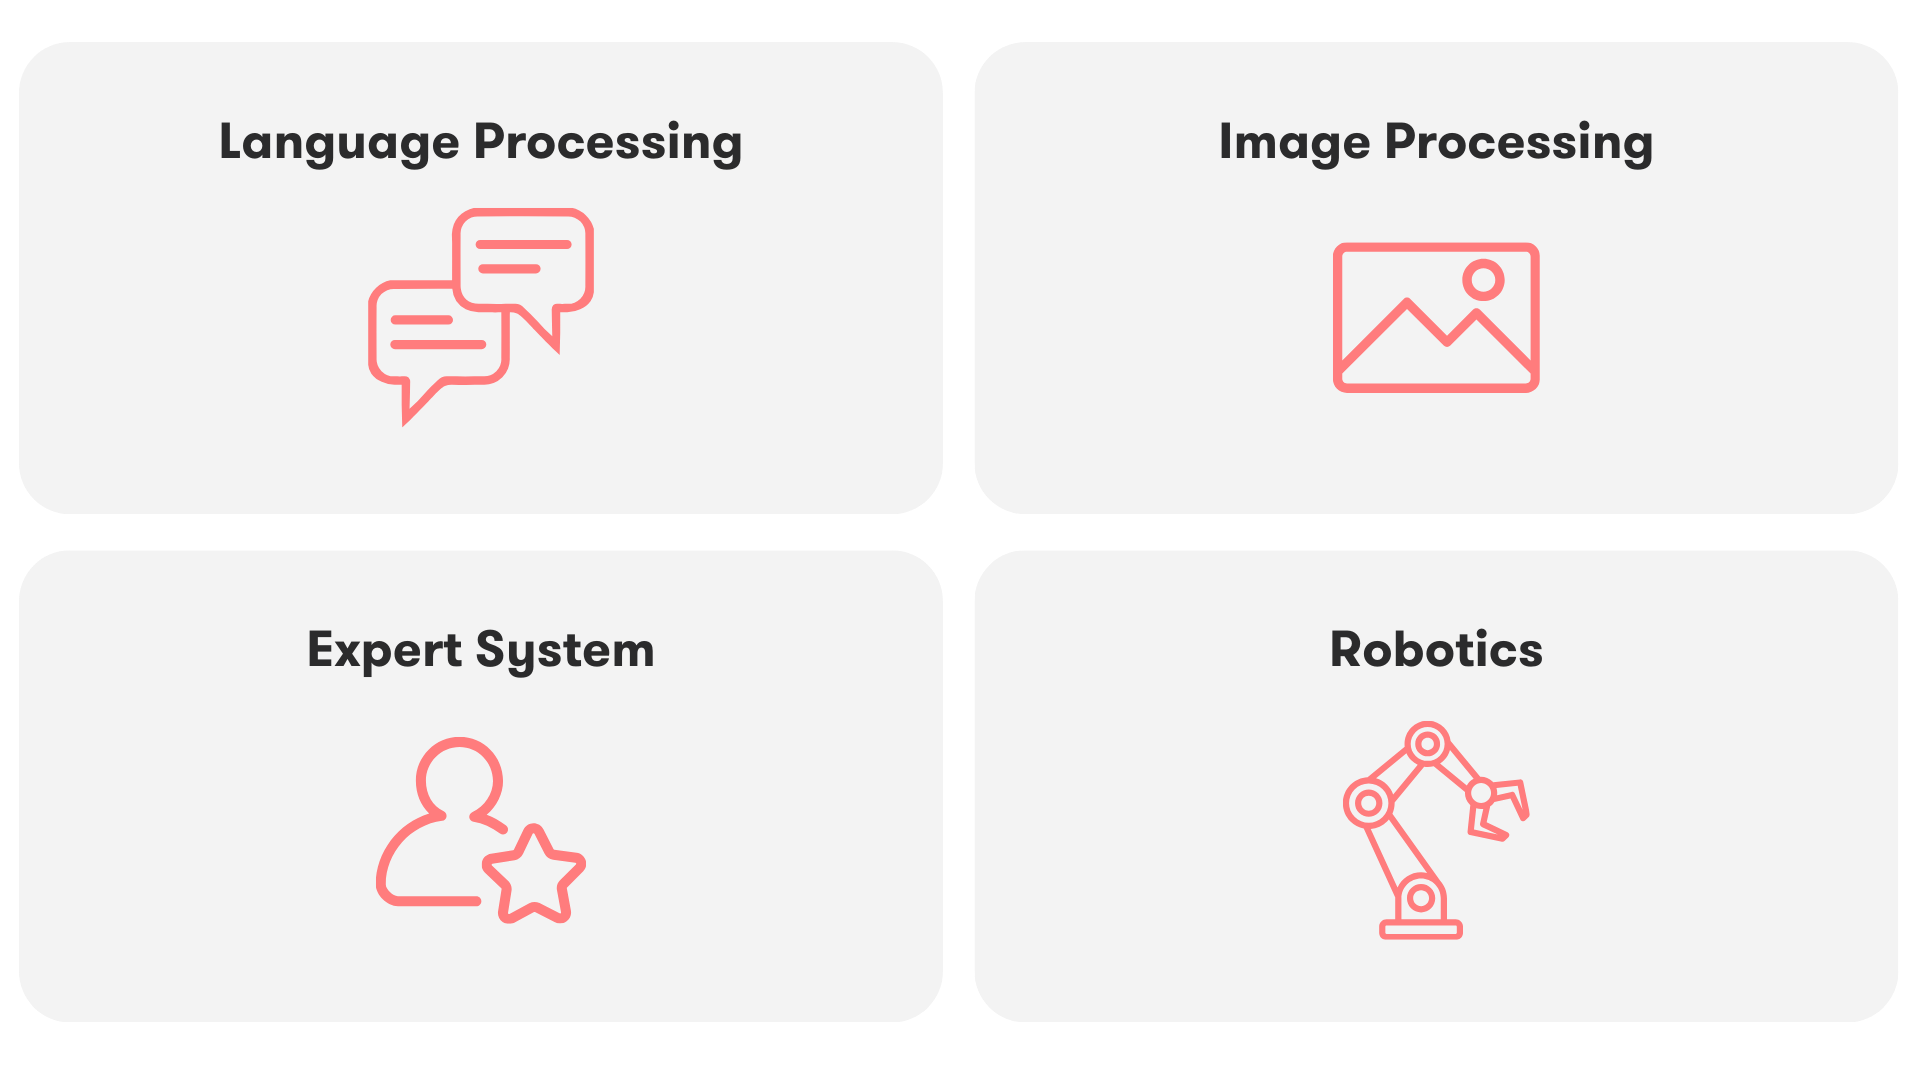 The image shows the four fields of application of language processing, image processing, expert systems and robots of artificial intelligence